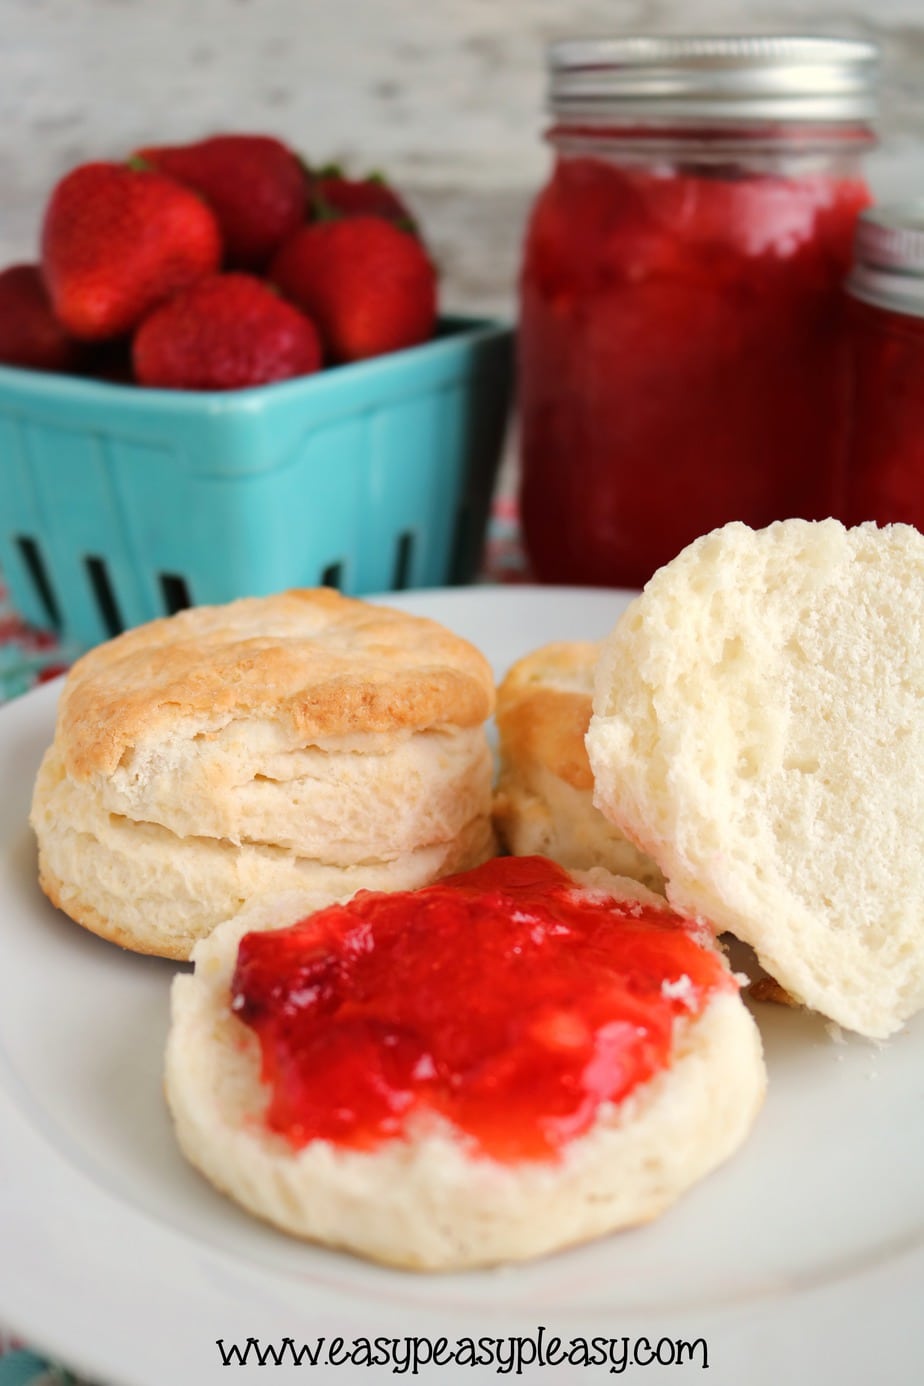 Check out this easy 3 Ingredient Strawberry Freezer Jam on top of these amazing homemade biscuits.